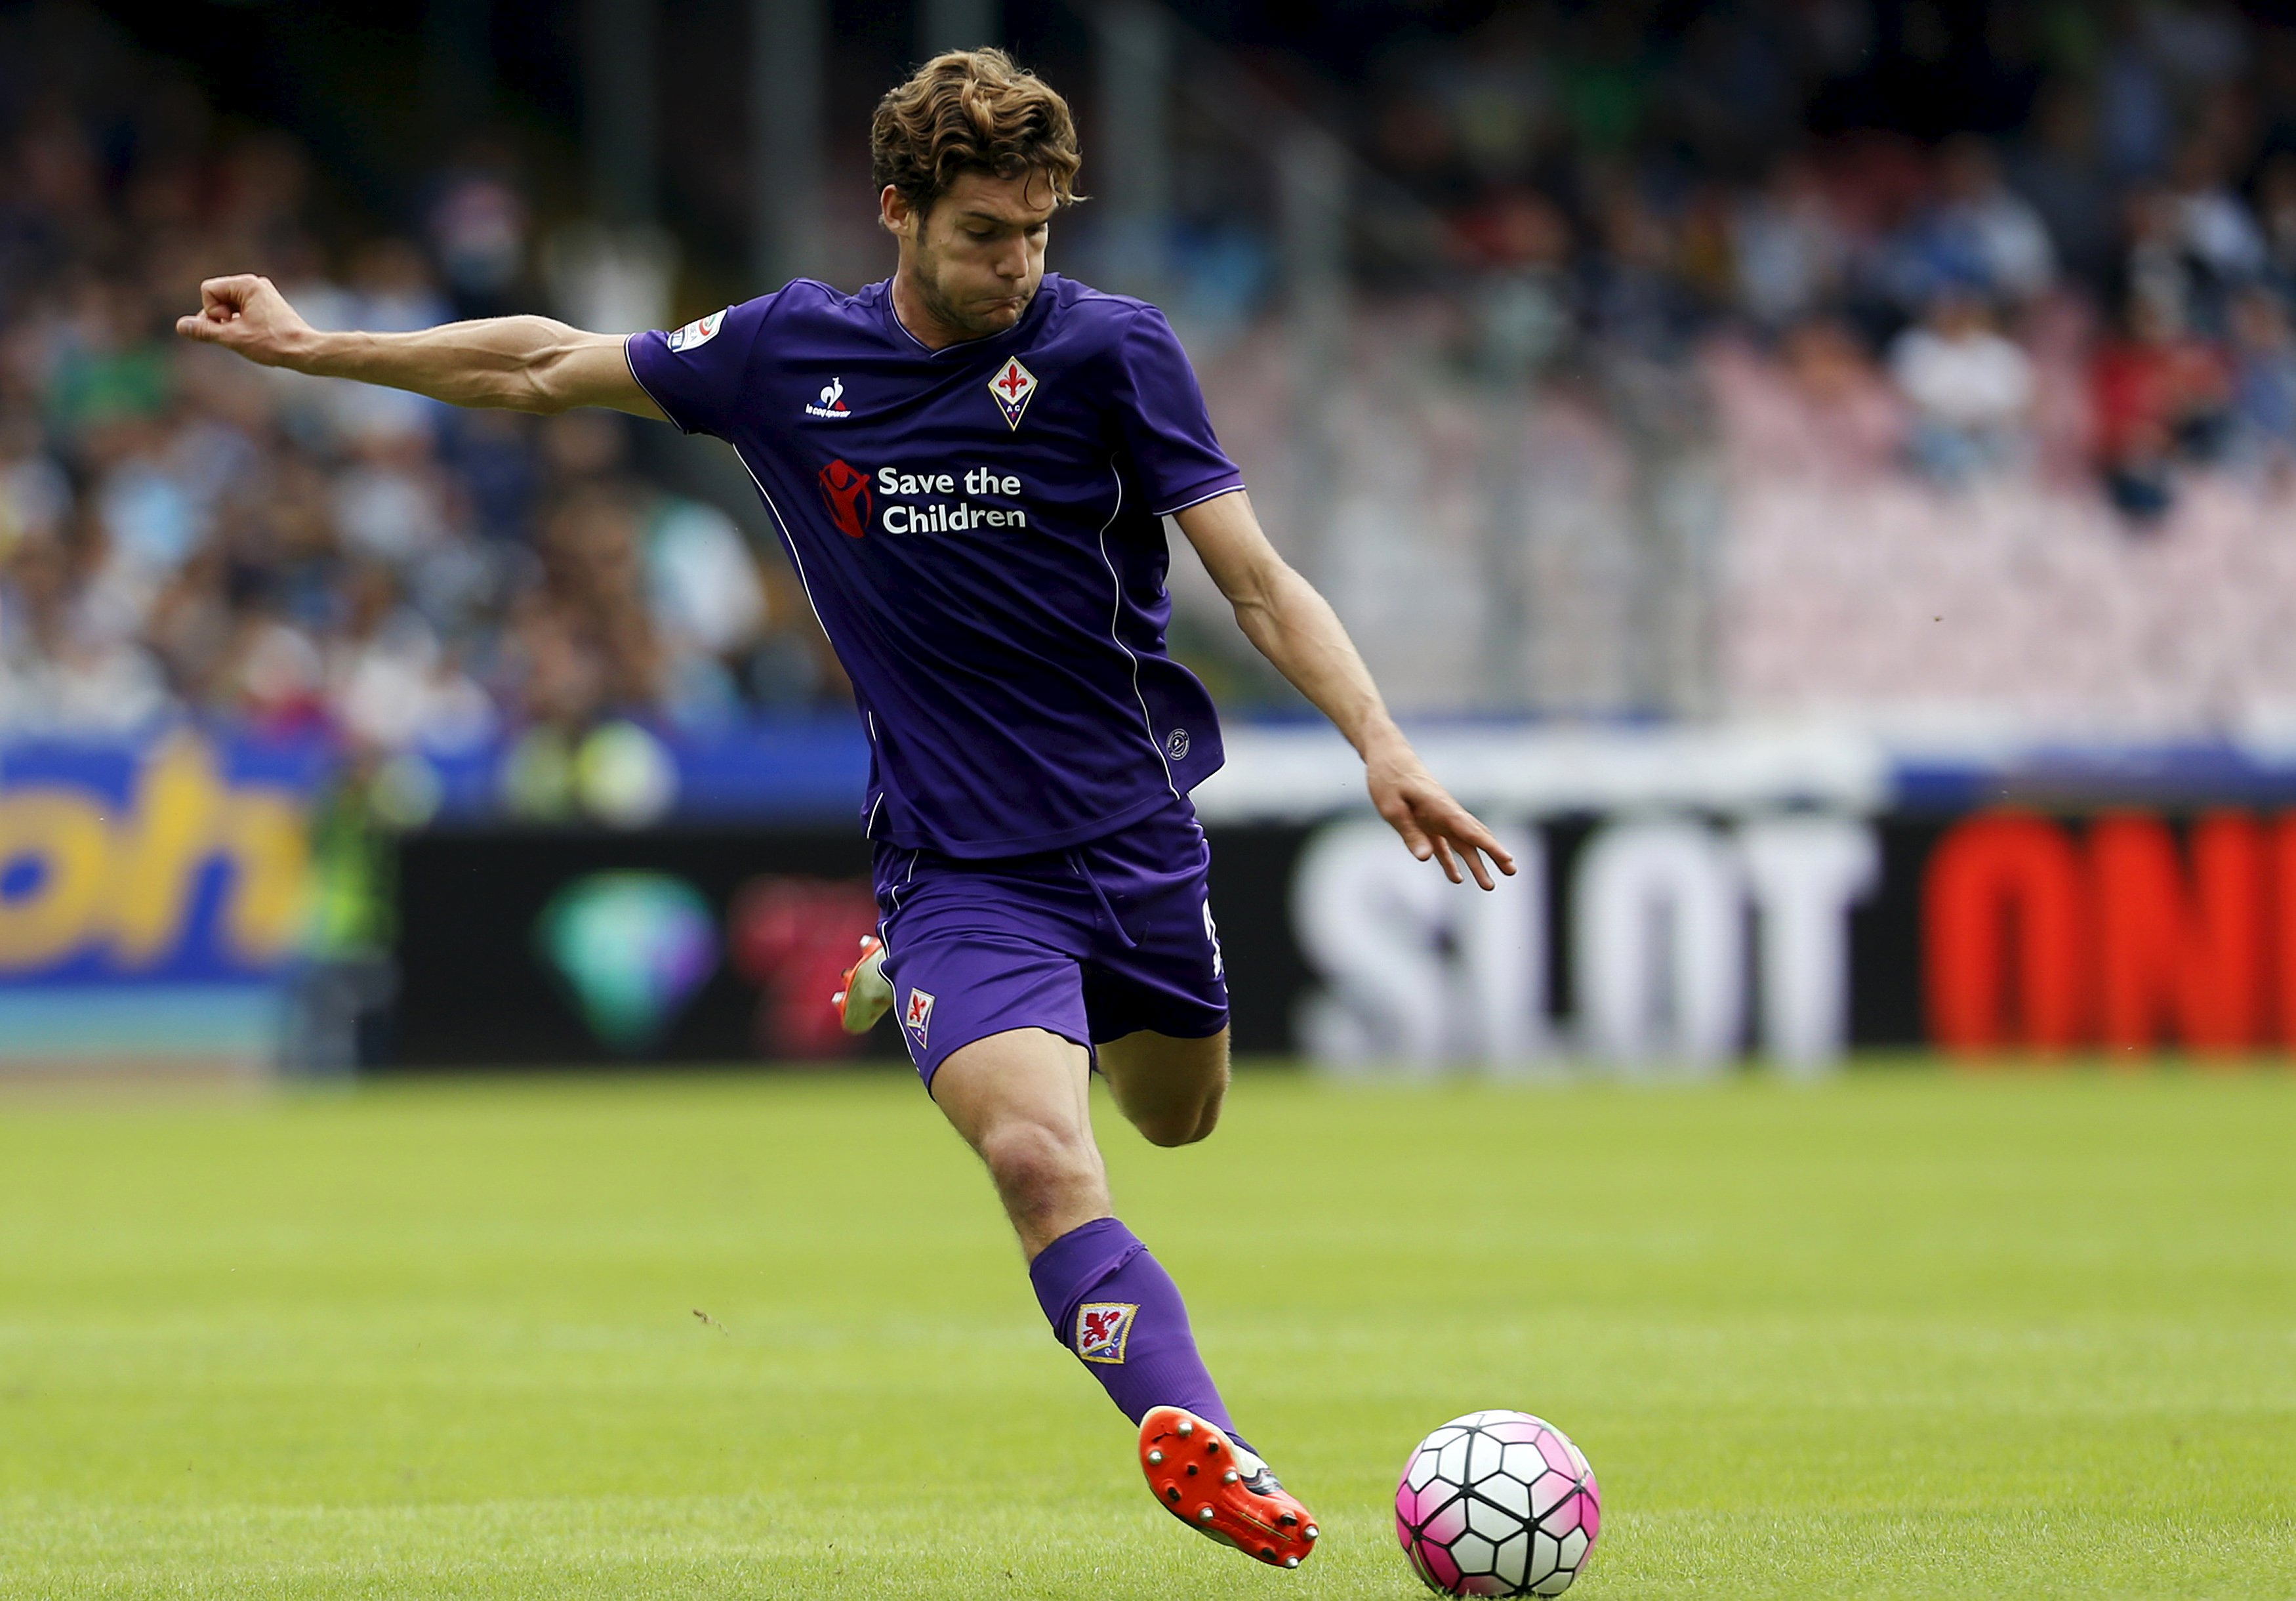 Fiorentina's Alonso shoots a ball during their Italian Serie A soccer match against Napoli in Naples